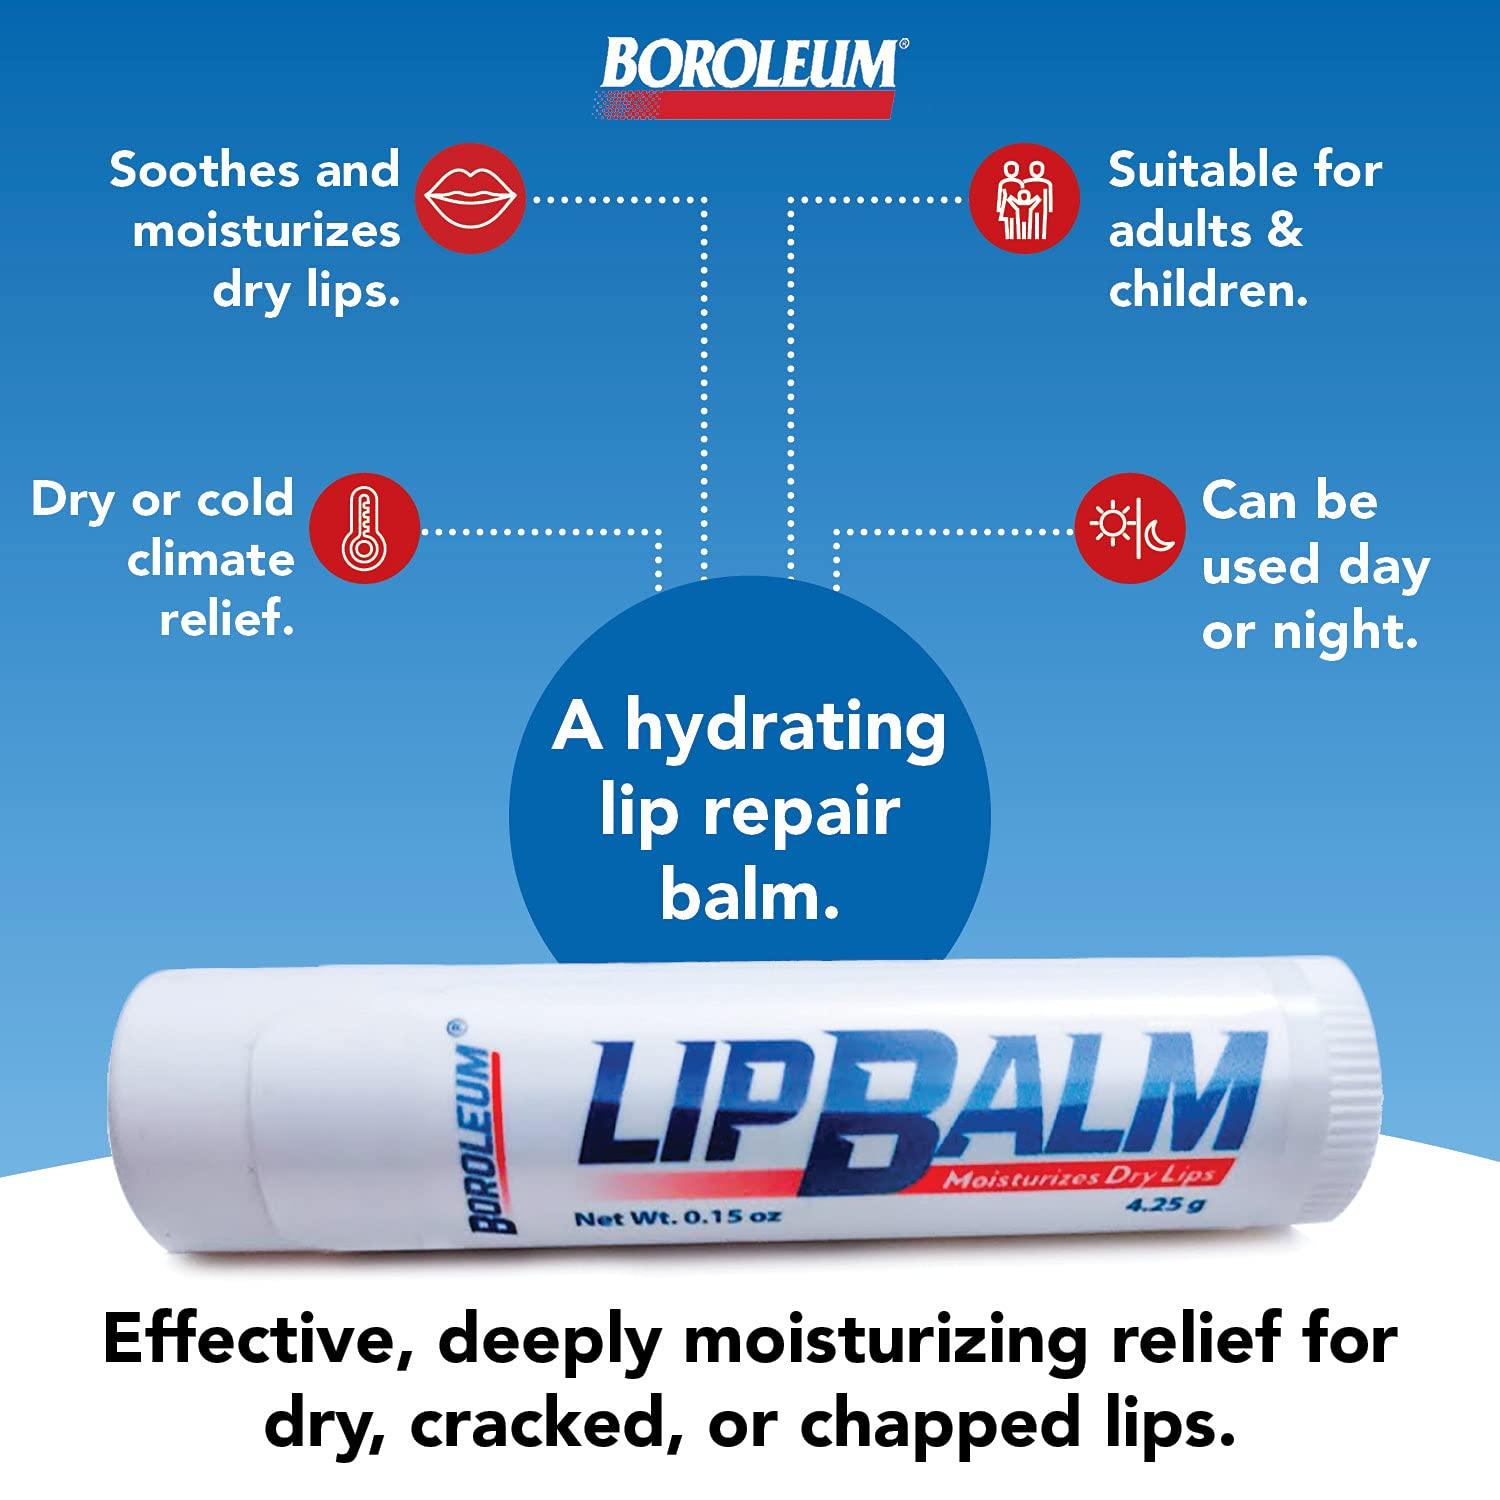 The Best Lip Balm for Kids with Chapped Lips in the Winter